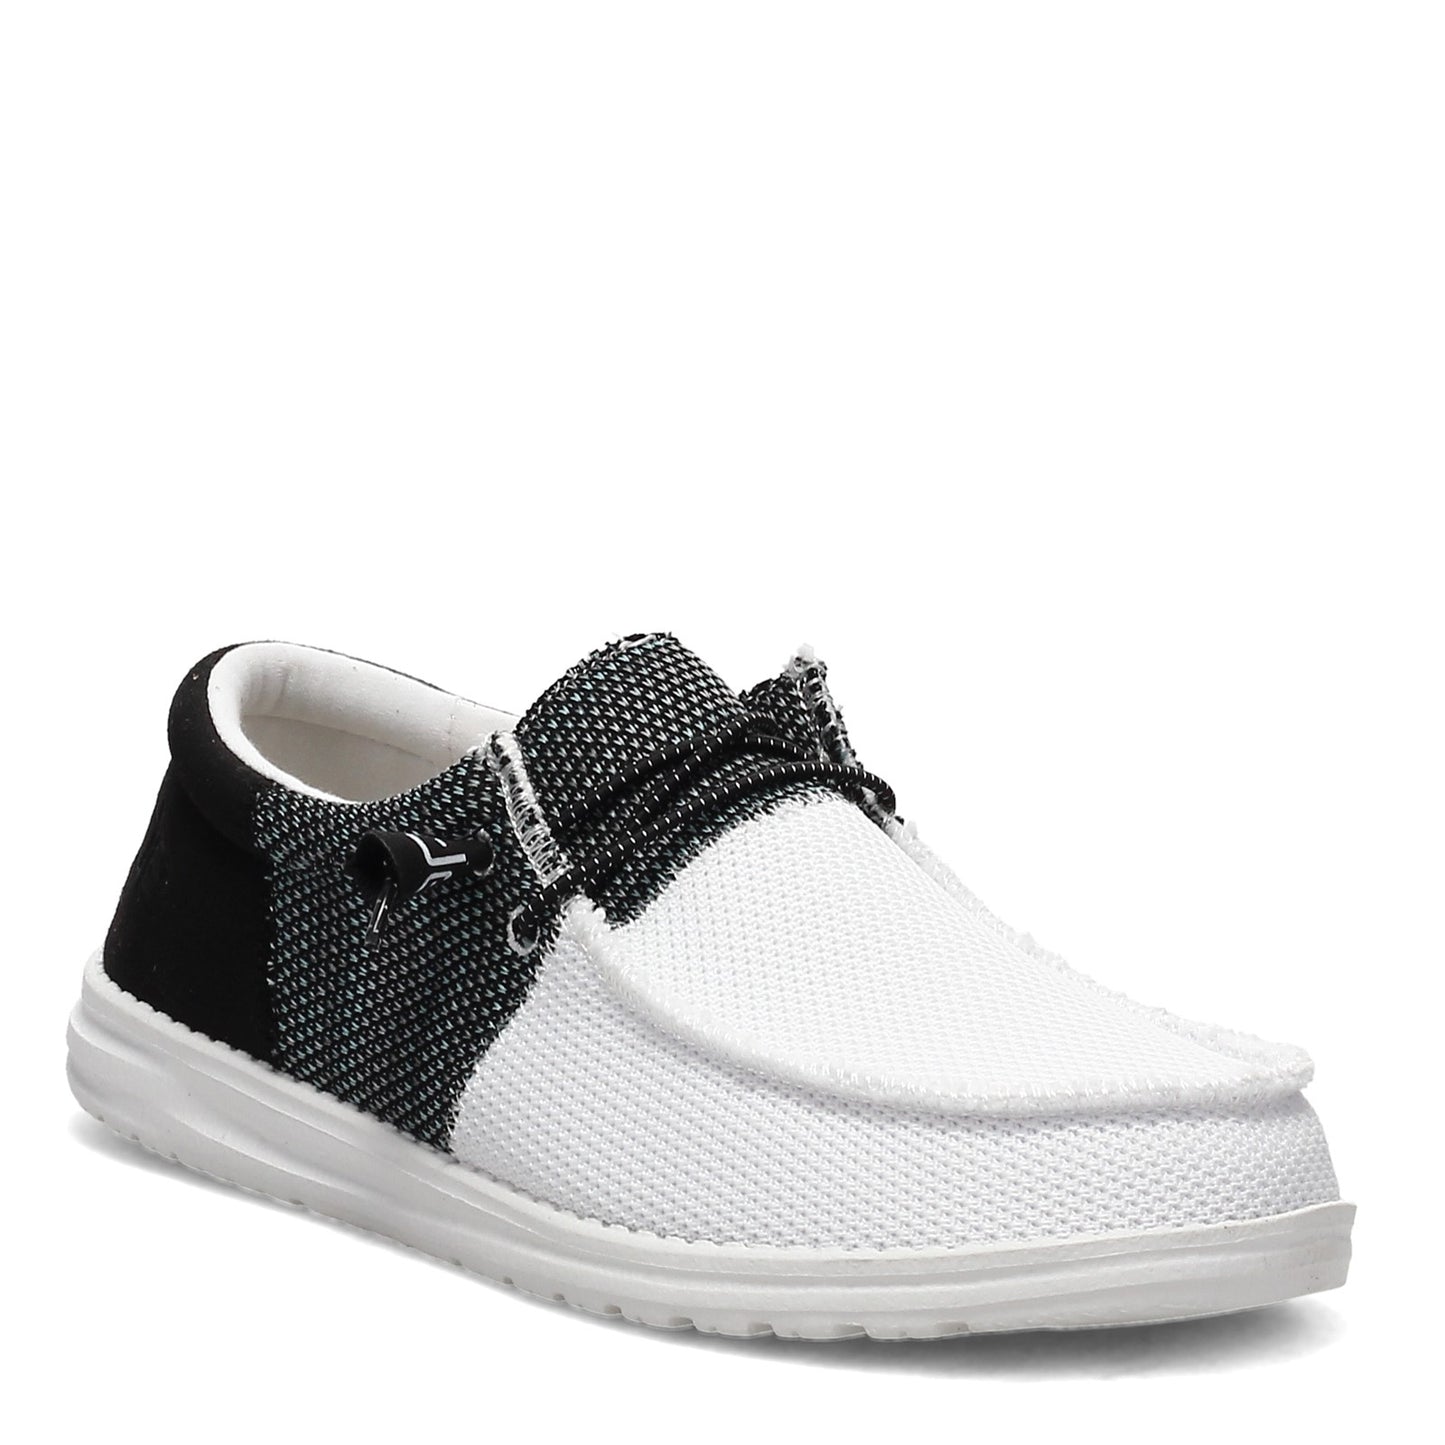 Hey Dude Men's Wally Sox Loafer, Black/White, US Size 11 8058268746873